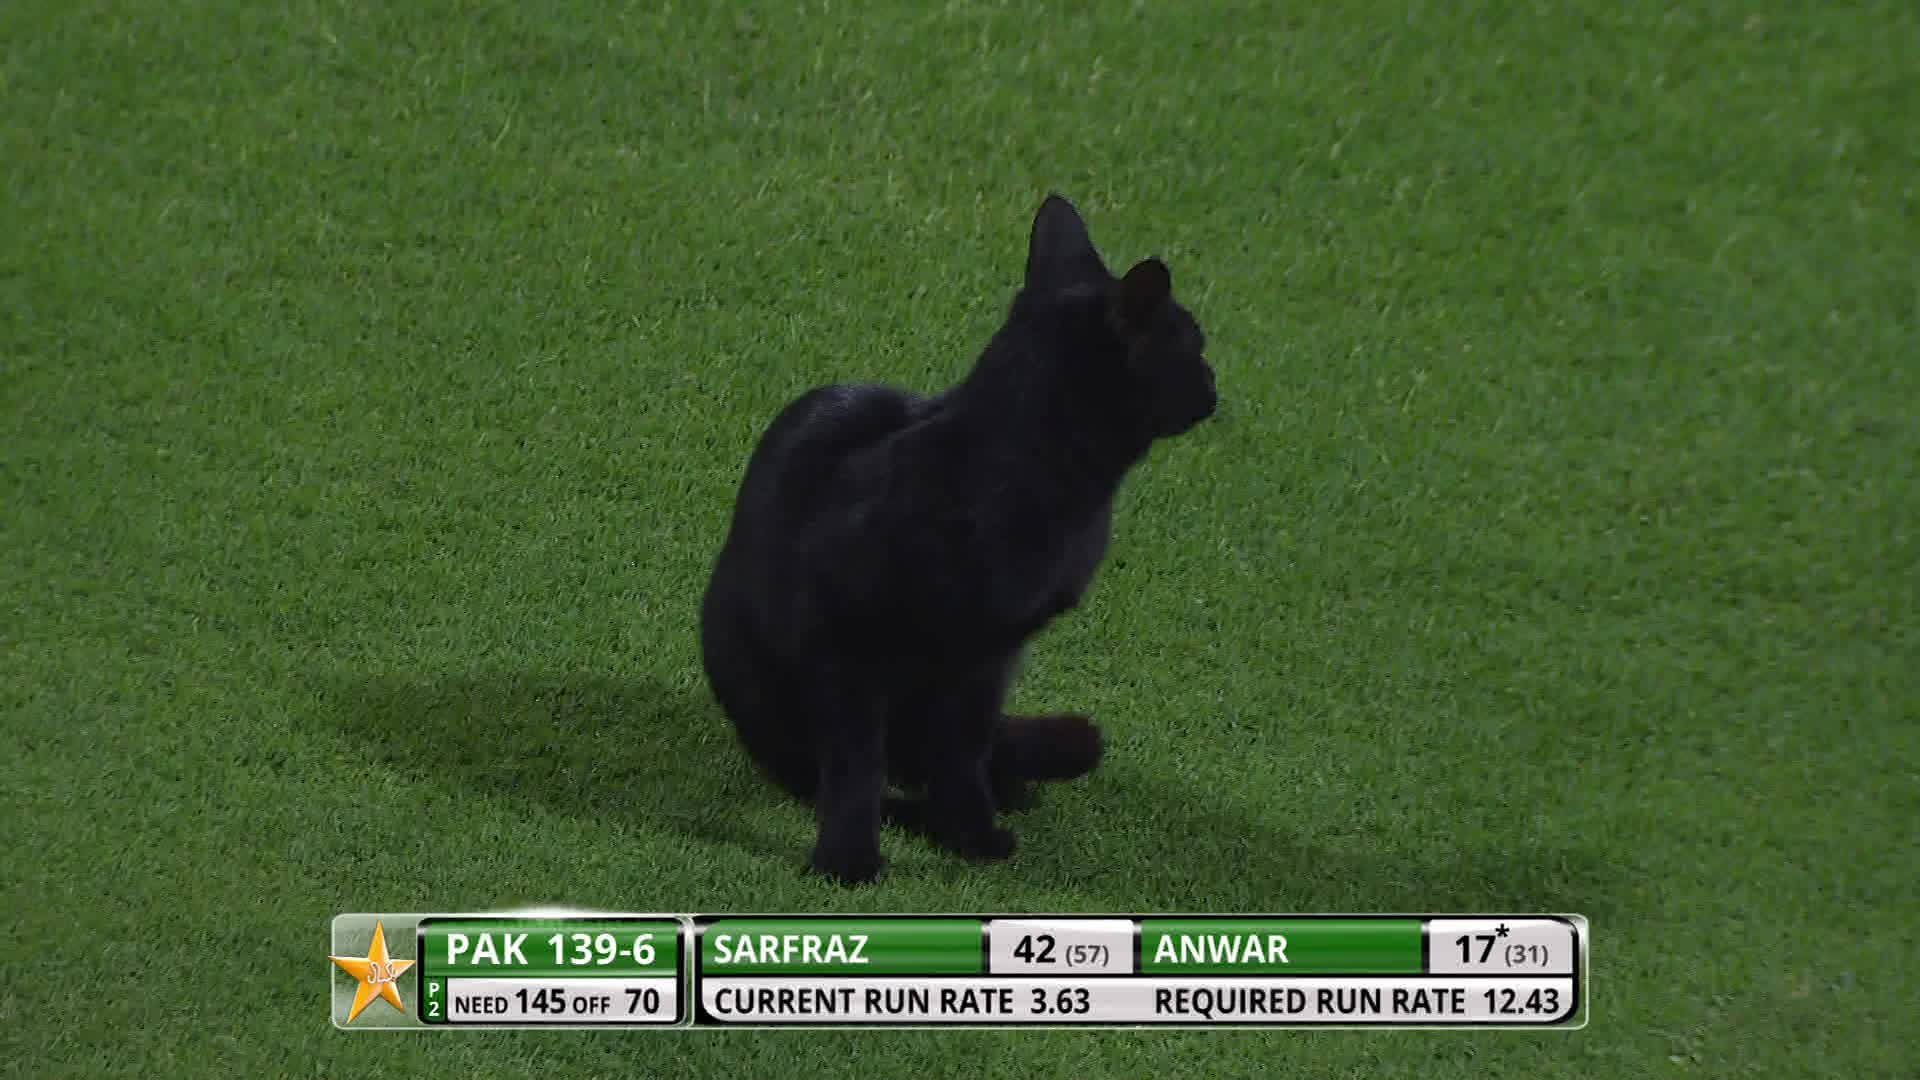 Pakistan v England: Cats enter the field in second ODI in Abu Dhabi ...